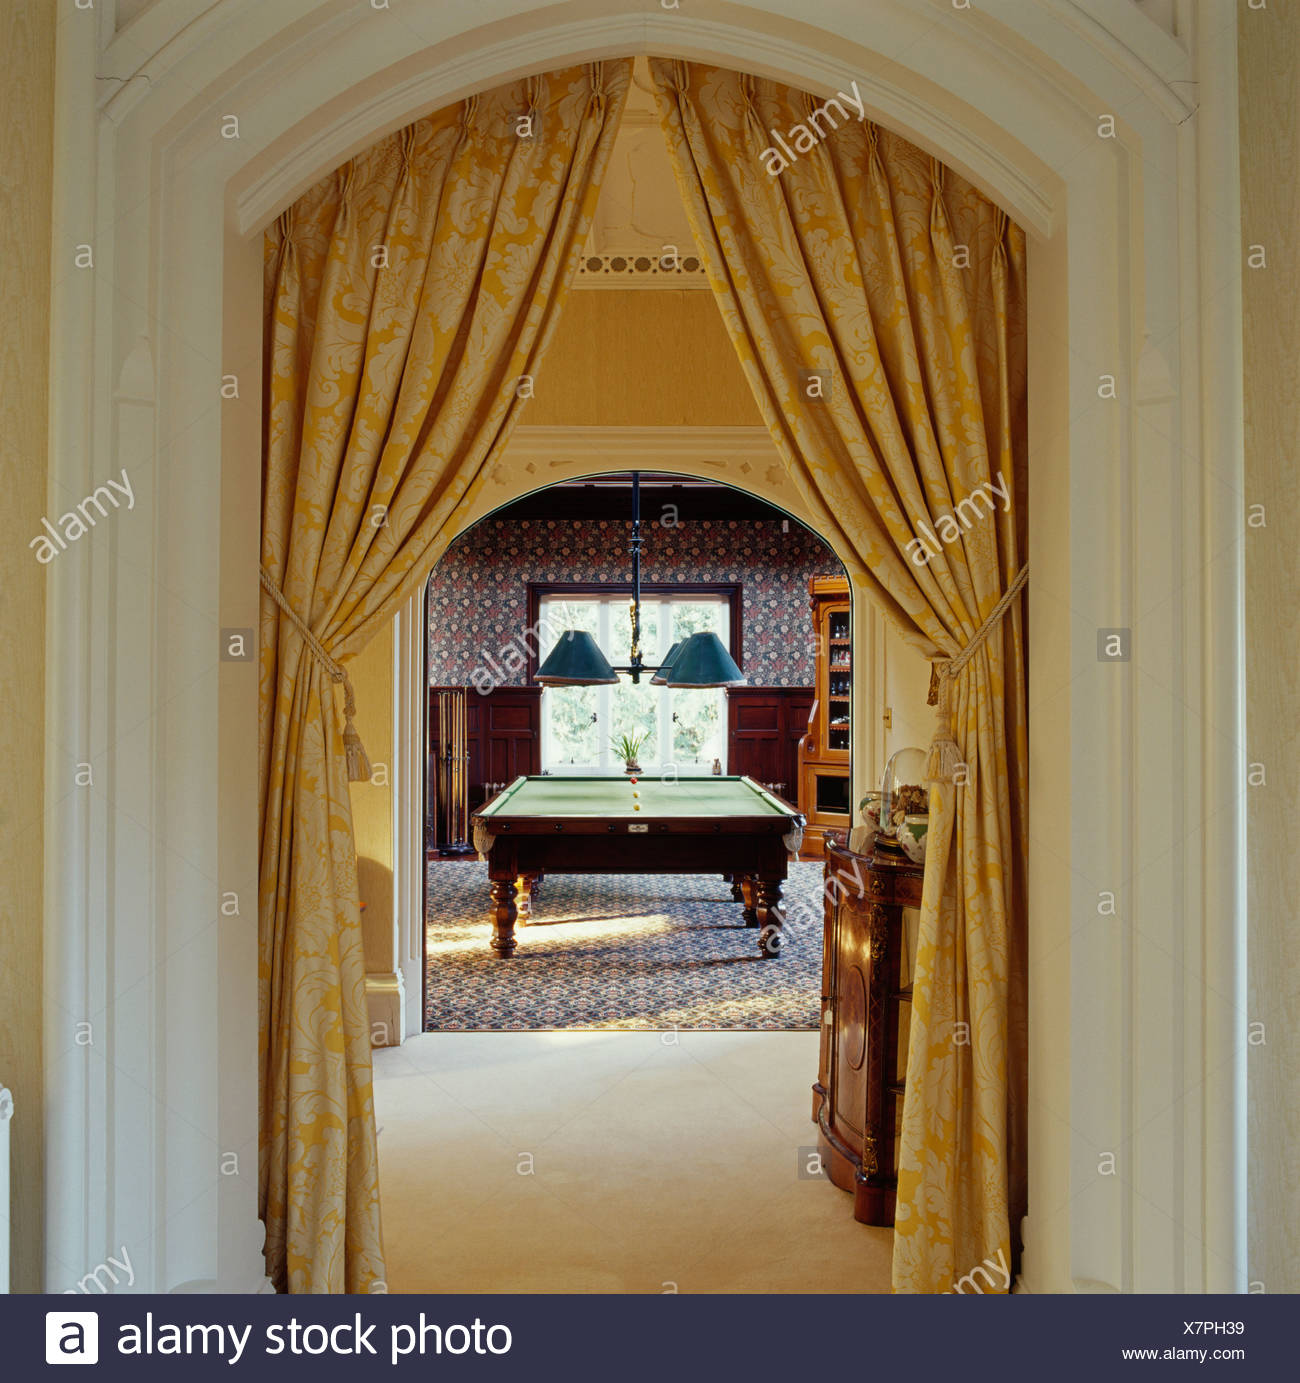 Table Curtain Doorway Interior High Resolution Stock Photography and Images  - Alamy